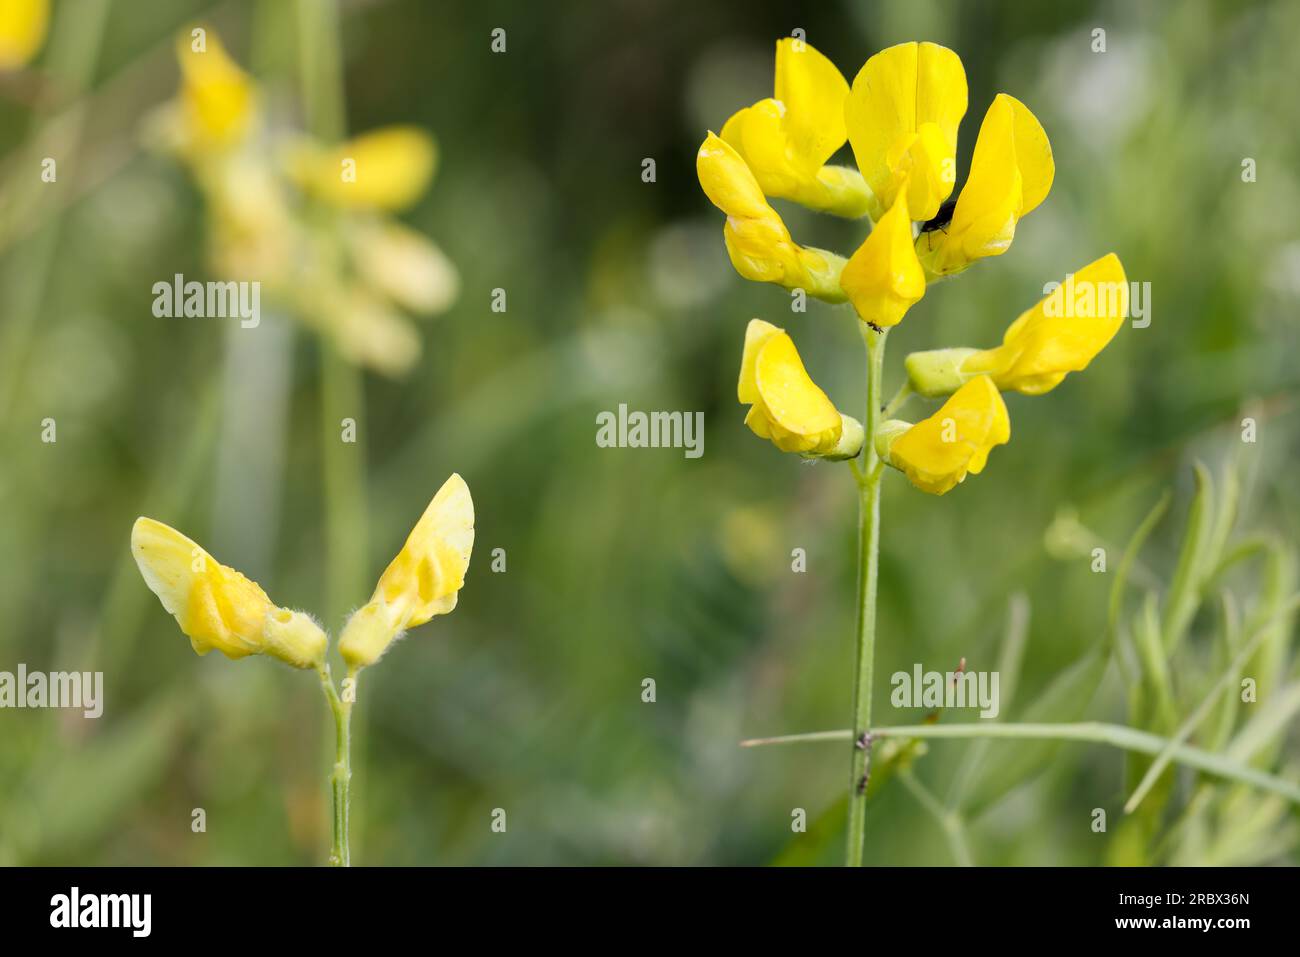 Meadow vetchling Stock Photo